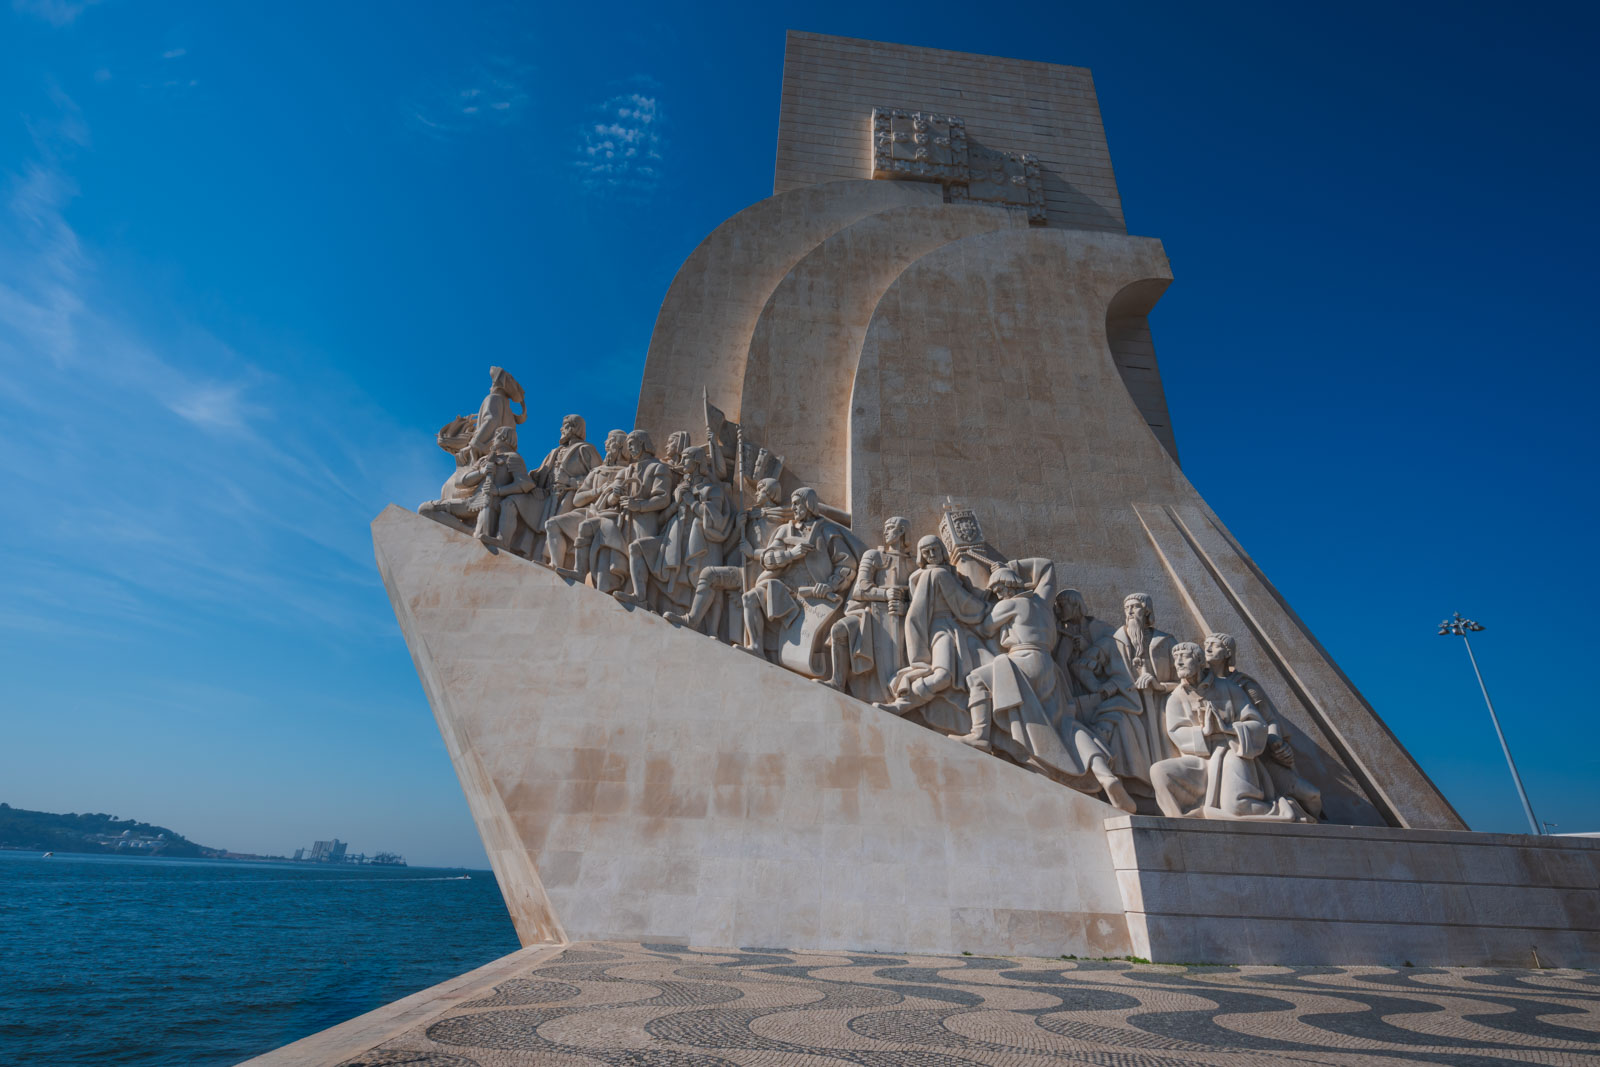 Where to stay in Belem Statue